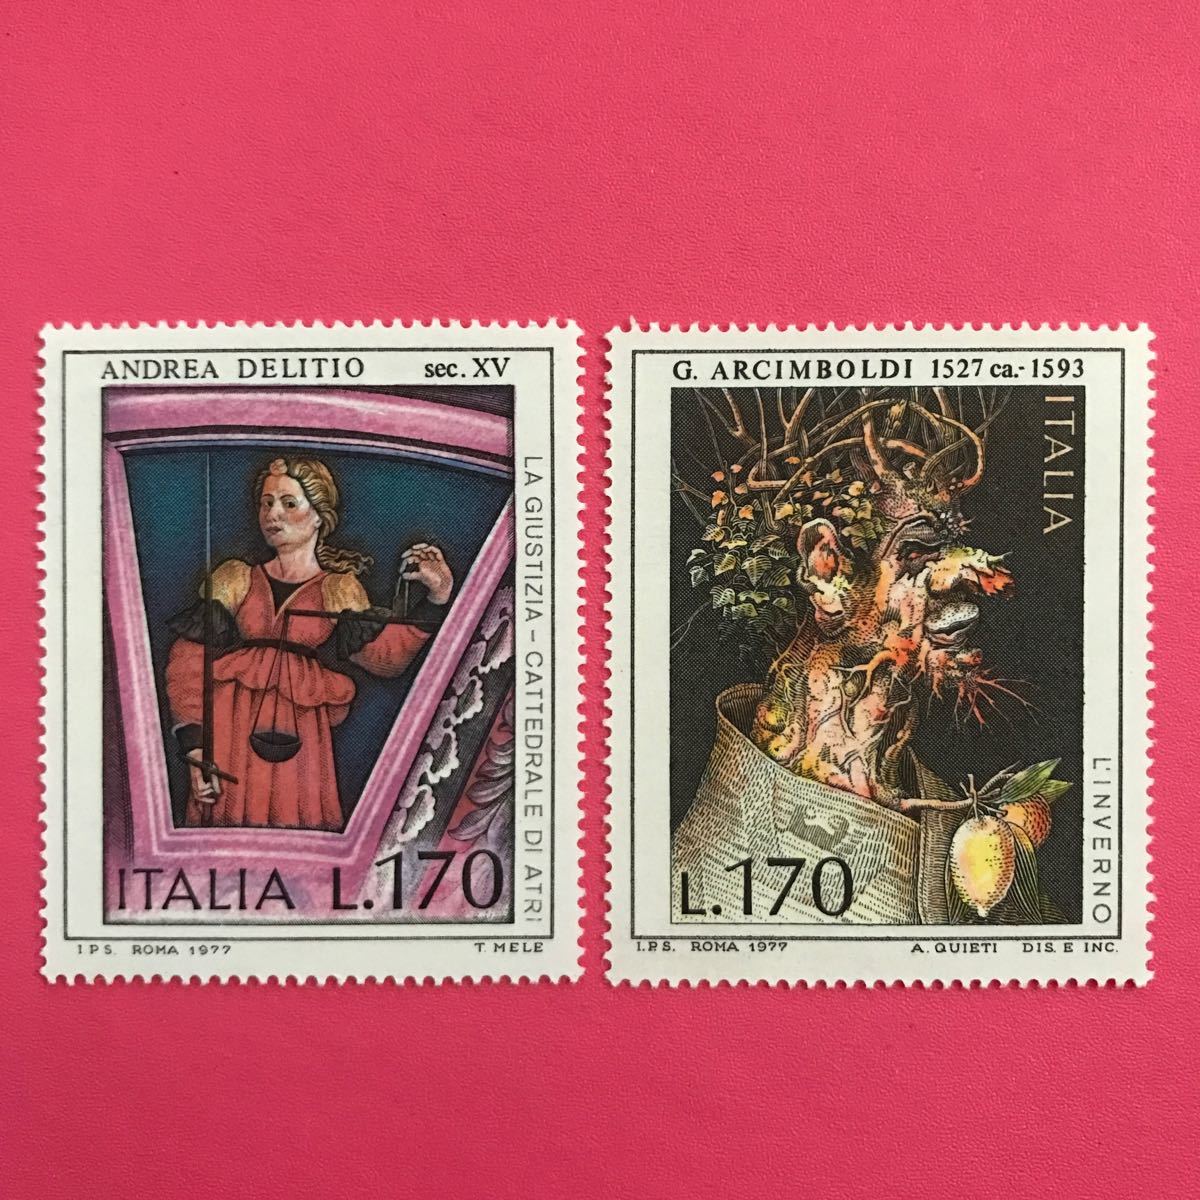 Foreign unused stamp★Italy 1977 Andrea De Ritio, Giuseppe Arcimboldo paintings 2 types, antique, collection, stamp, postcard, Europe